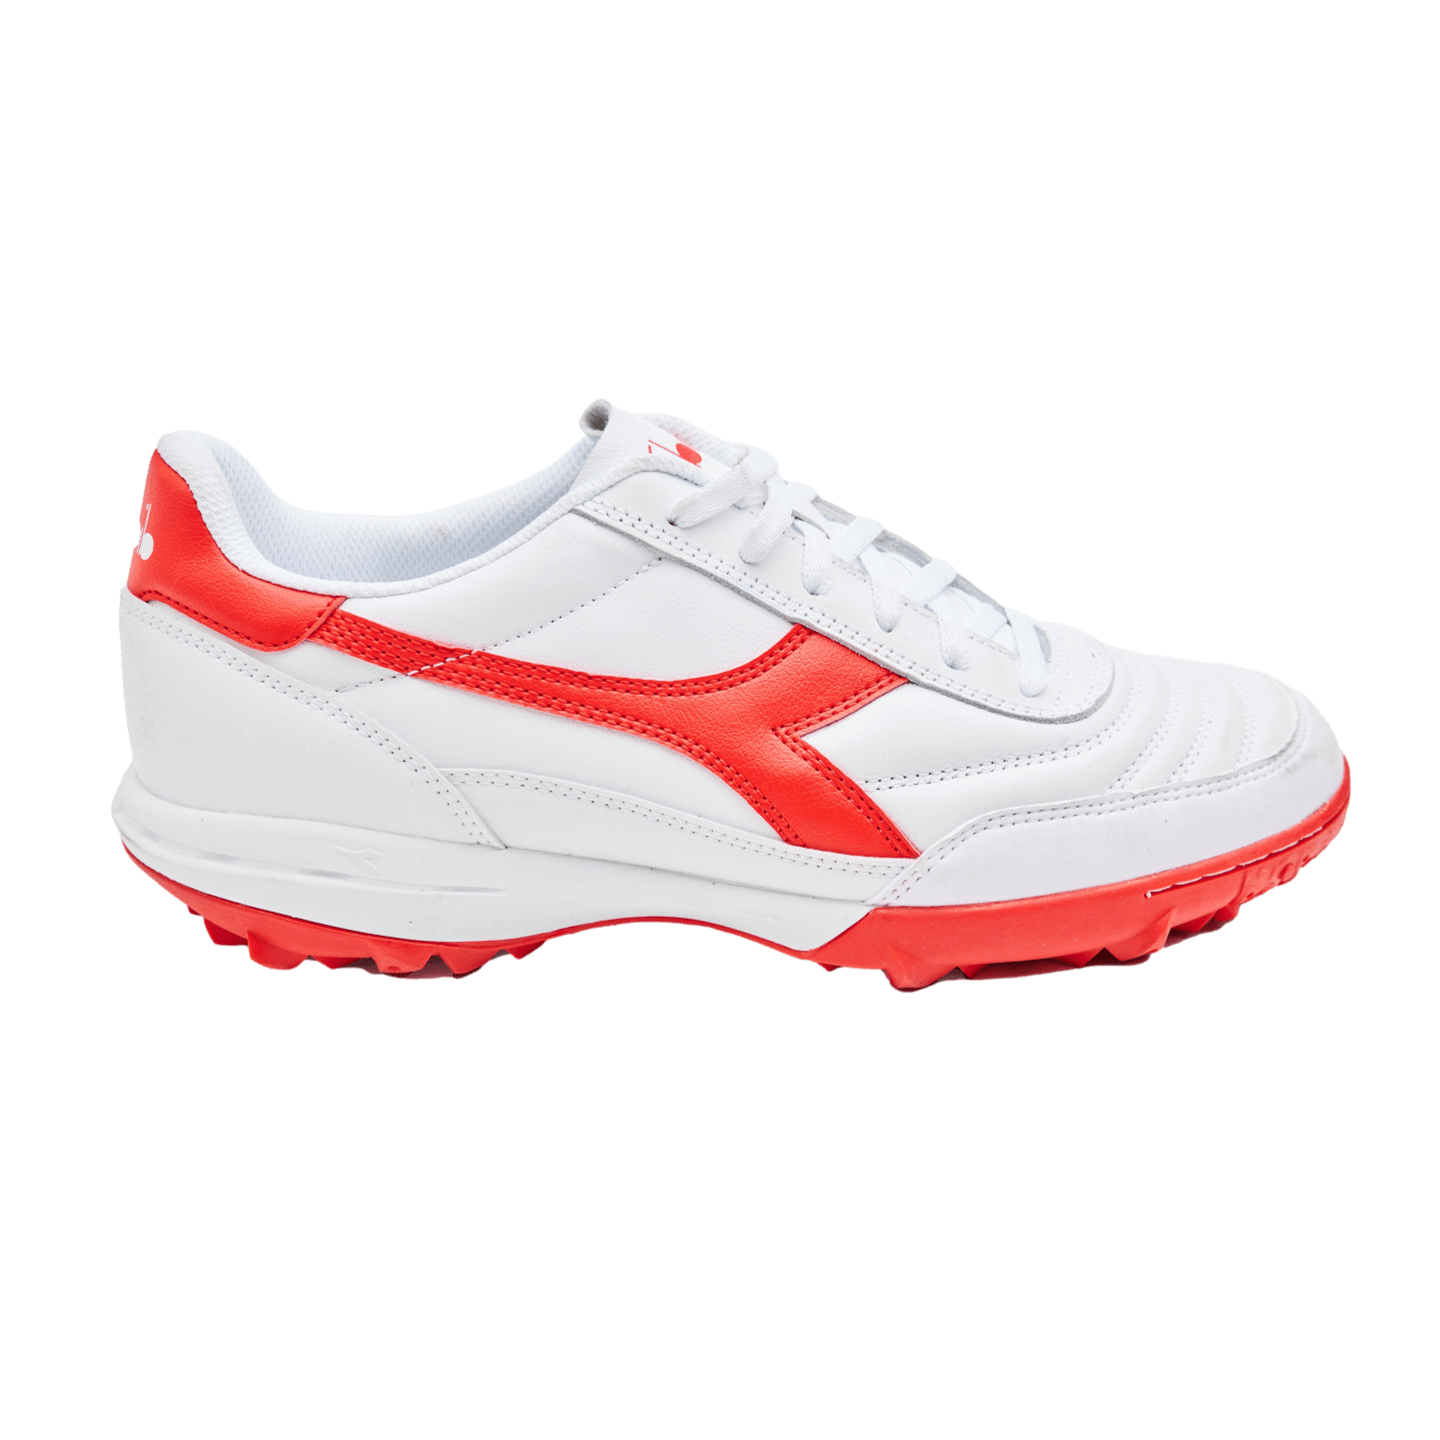 Diadora Calcetto LT Turf Soccer Shoes - White & Red